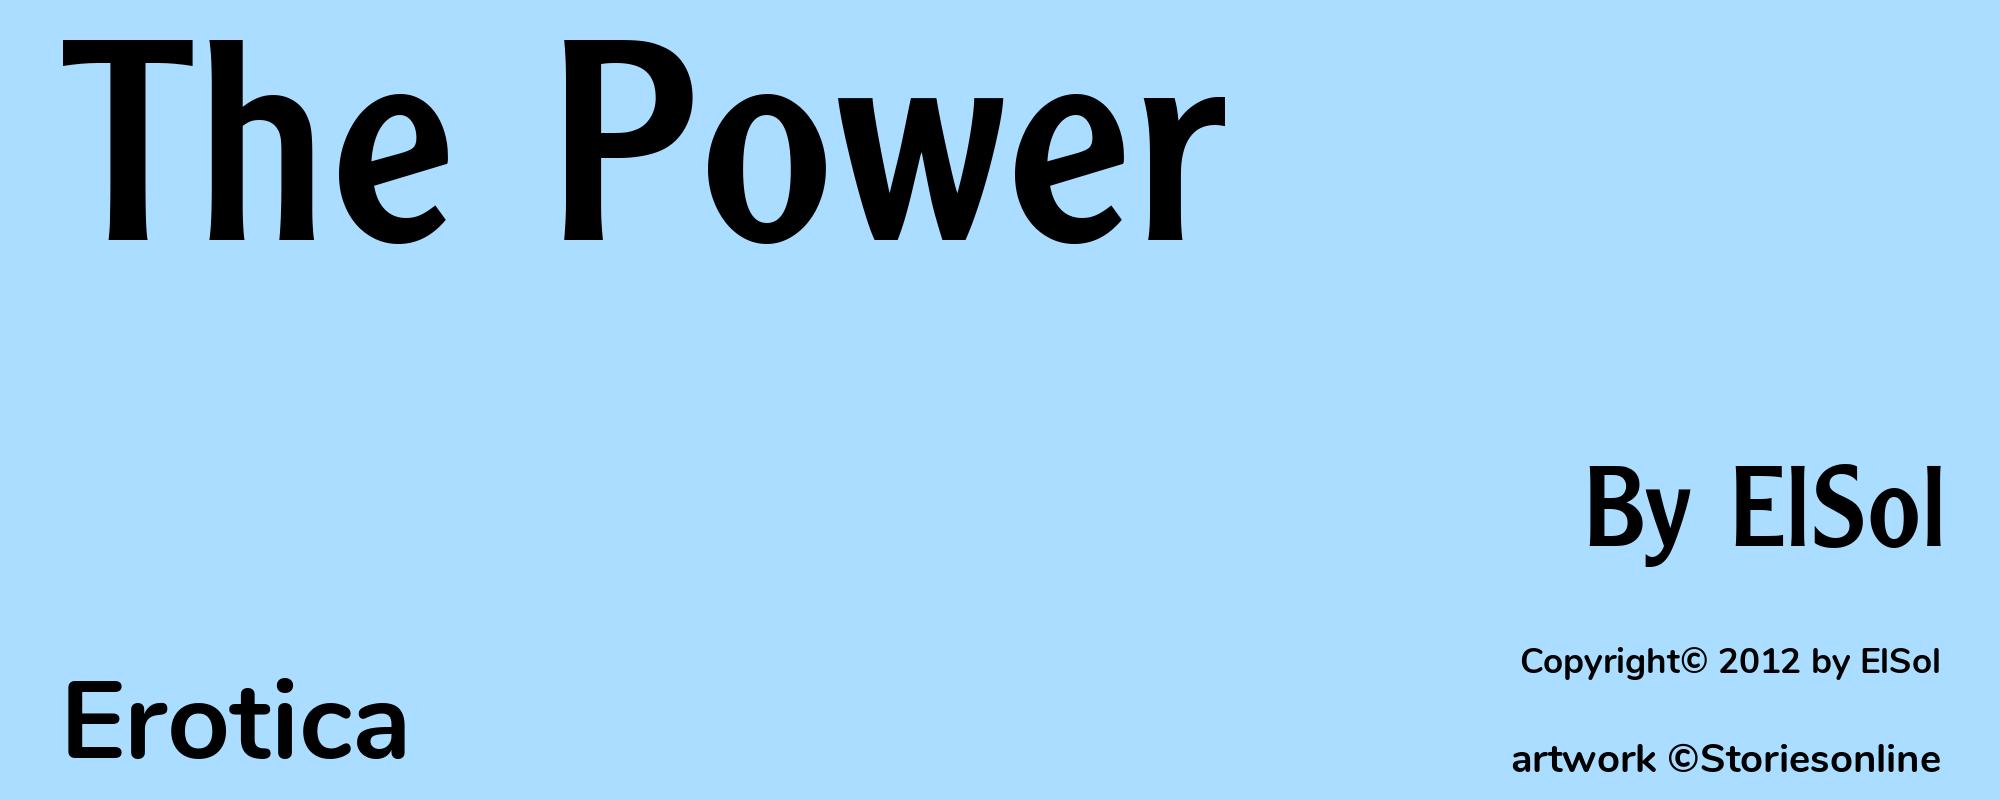 The Power - Cover